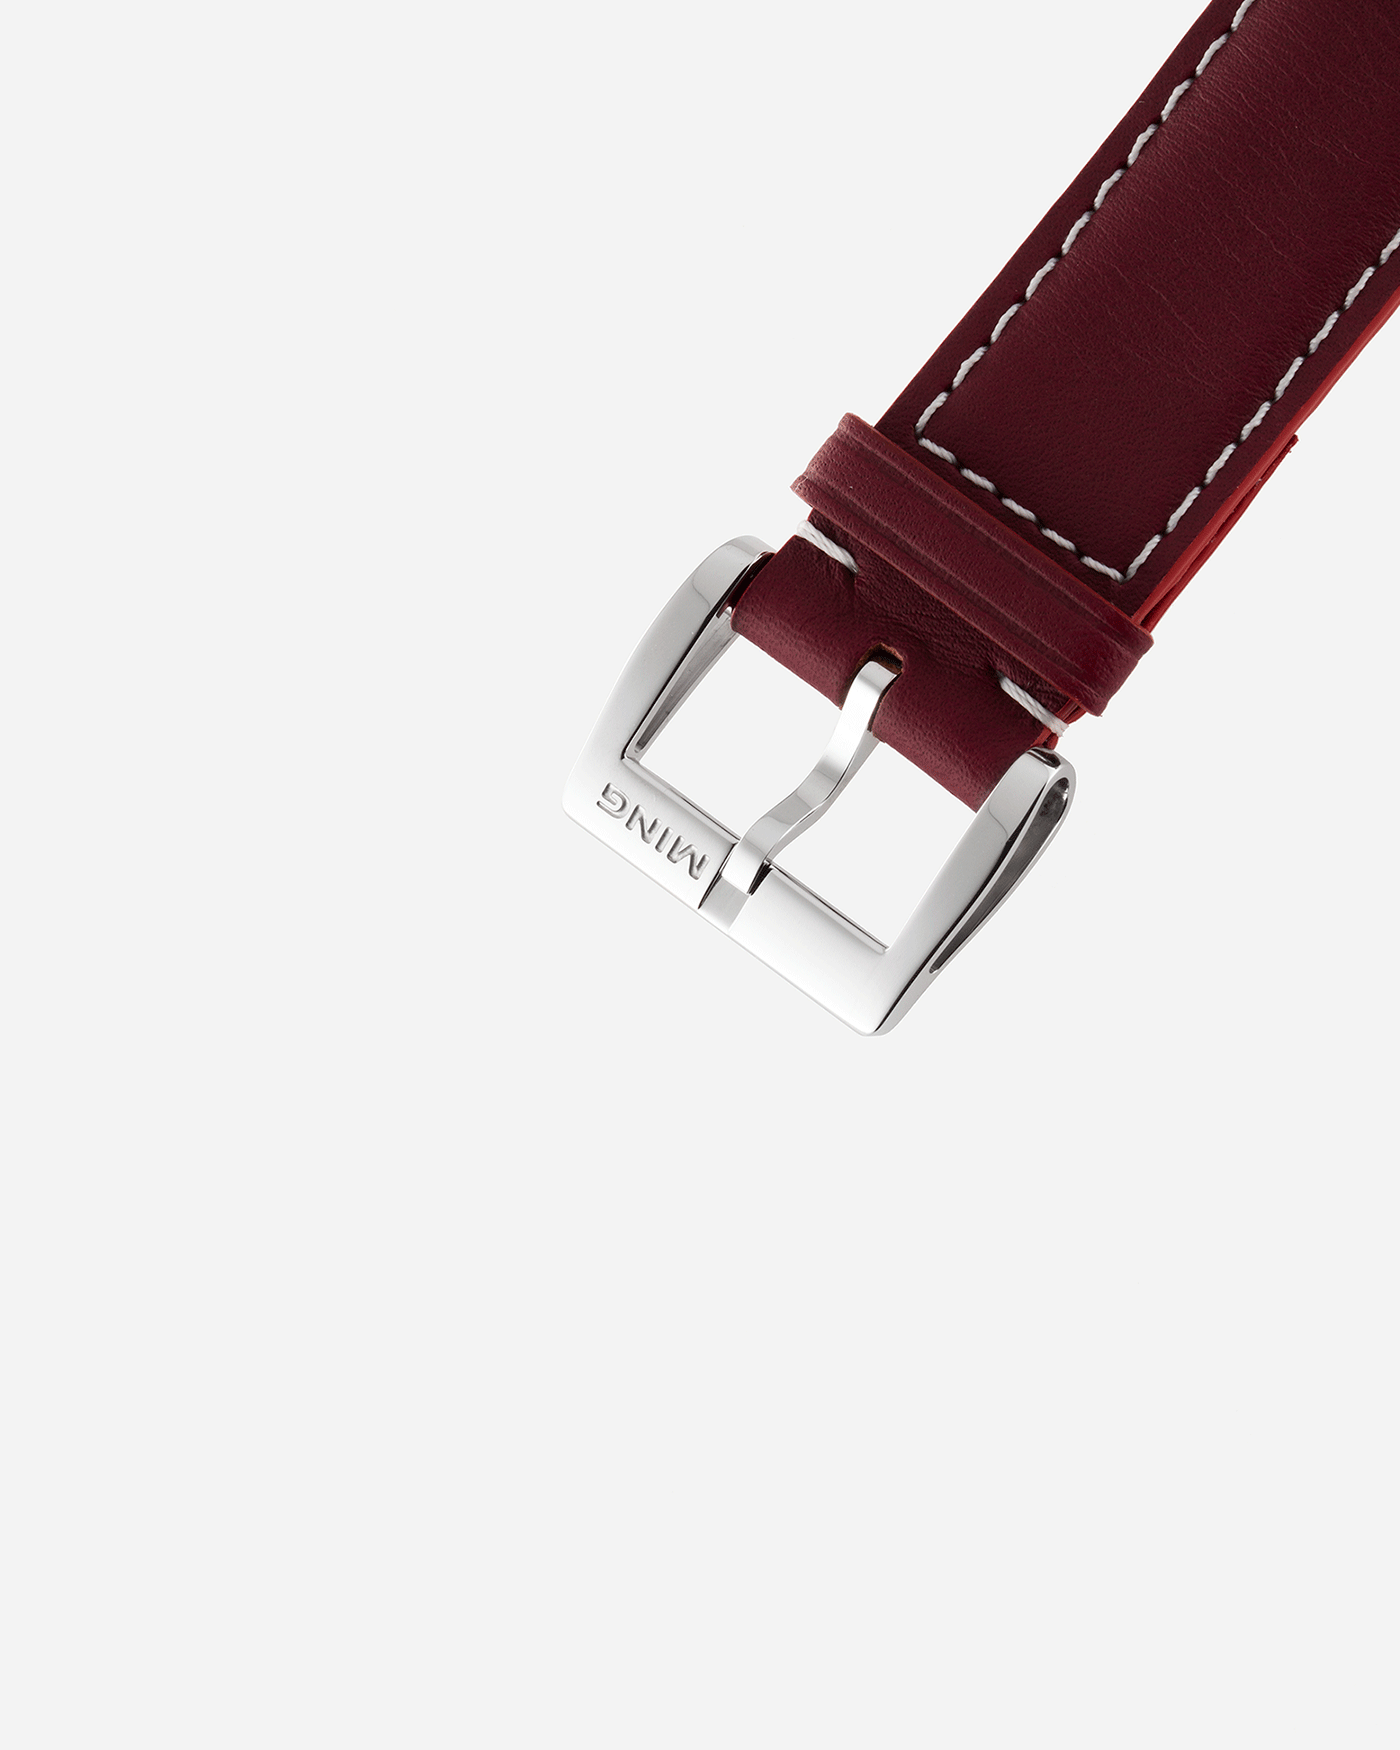 Brand: Ming Year: 2017 Model: 19.01 Material: Grade 5 Titanium Movement: Schwarz-Etienne for MING Cal. MSE100.1 Case Diameter: 39mm Strap: Ming / Jean Rousseau Red Leather Strap